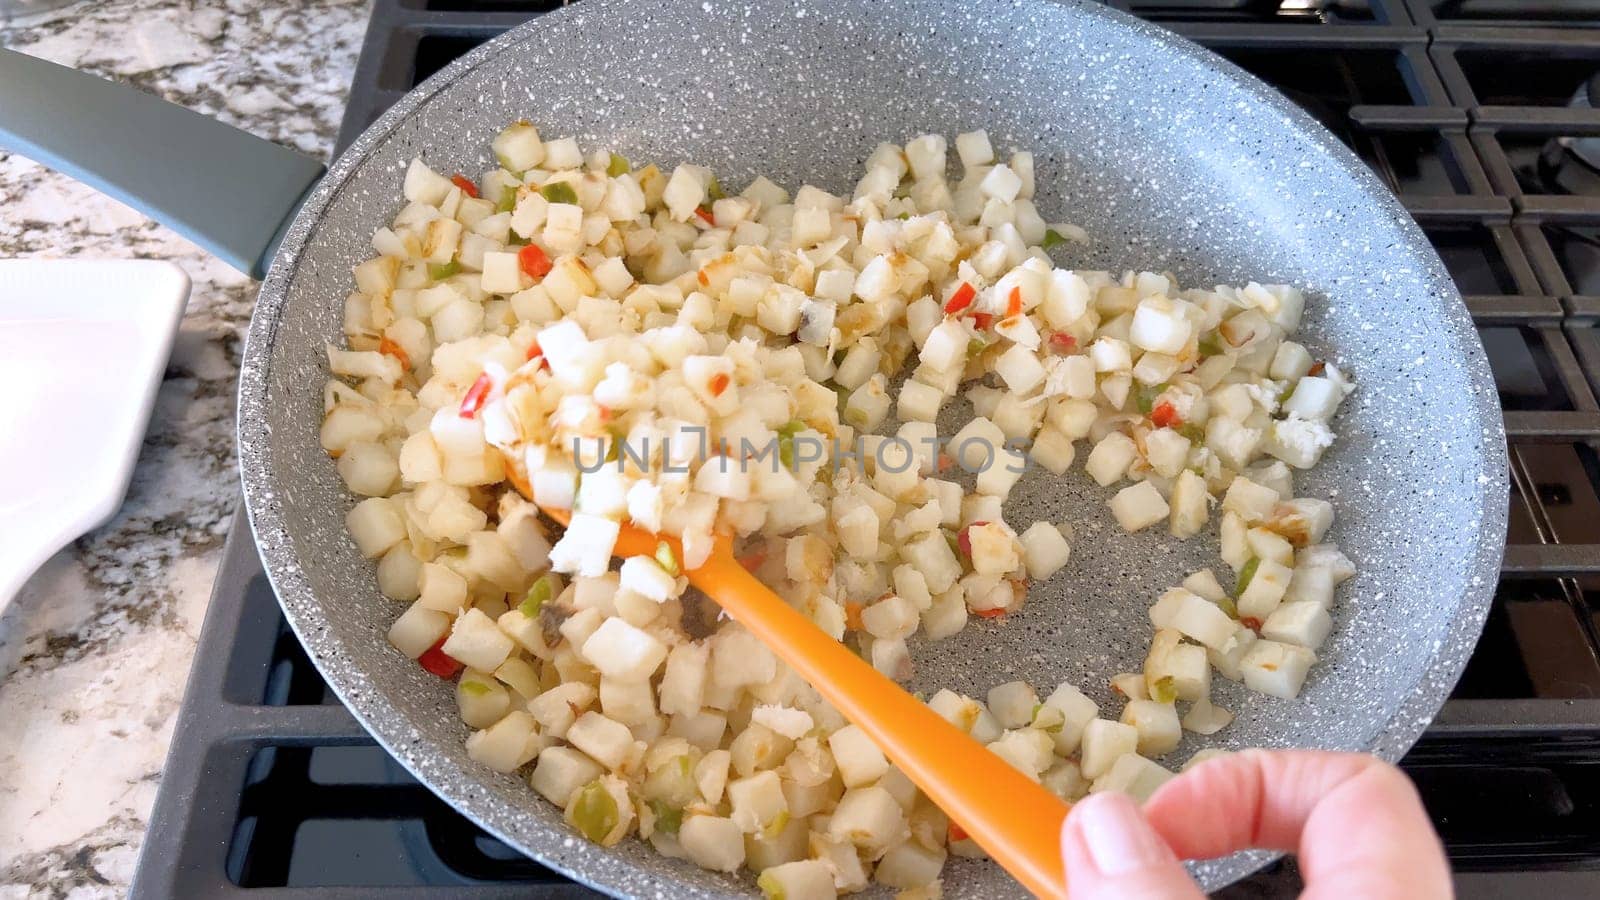 Sauteed Diced Potatoes with Peppers on a Gas Stove by arinahabich